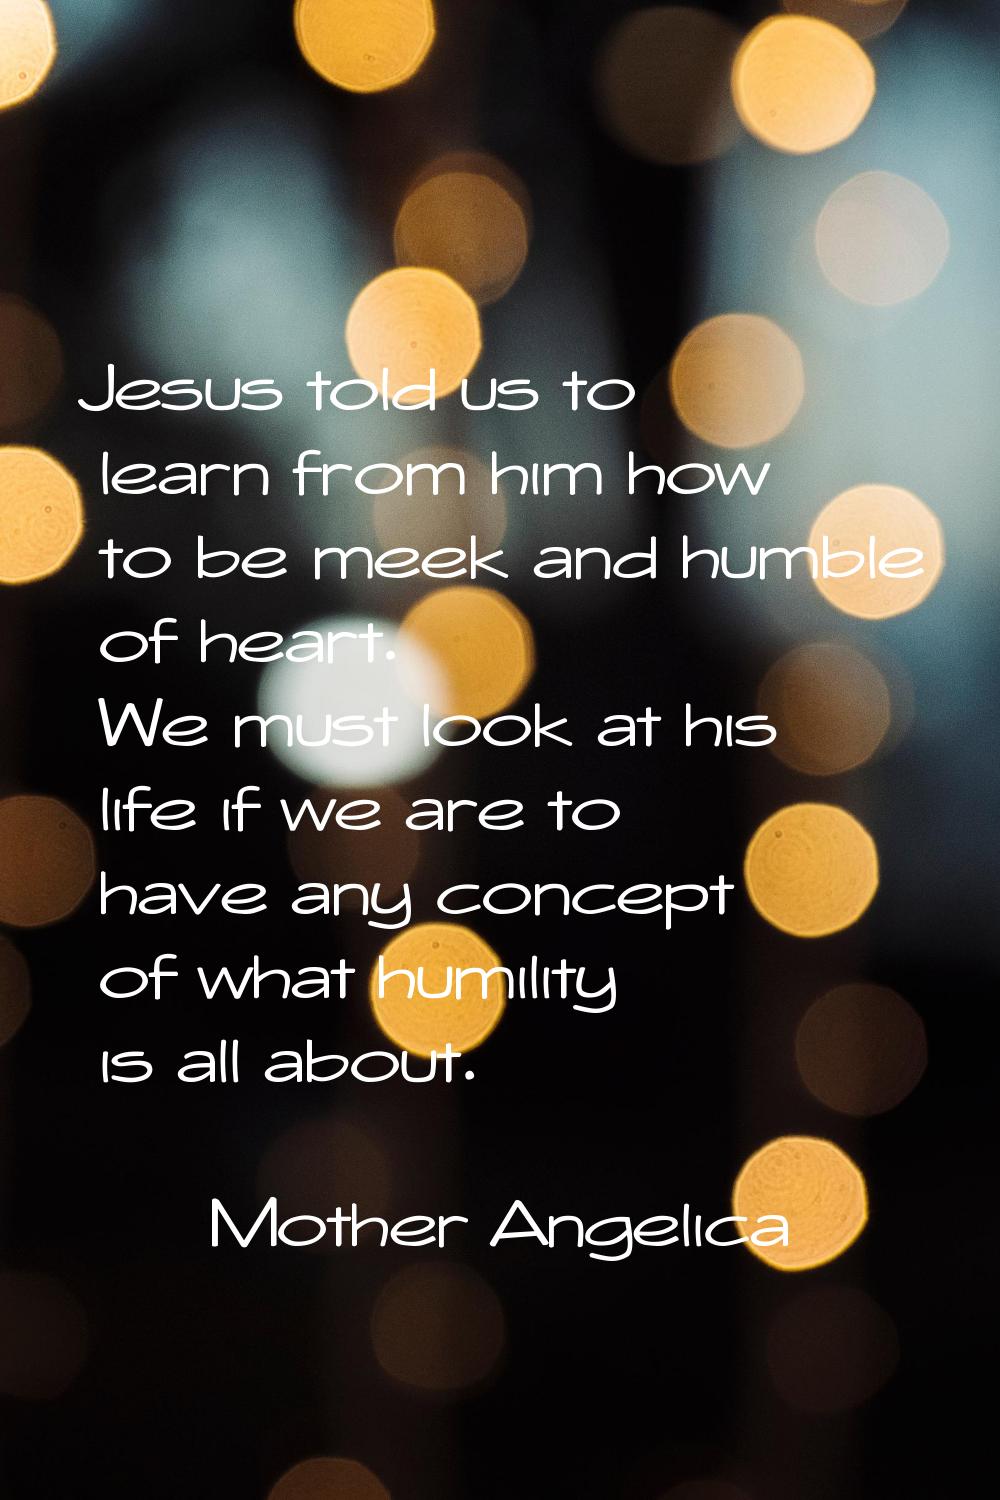 Jesus told us to learn from him how to be meek and humble of heart. We must look at his life if we 